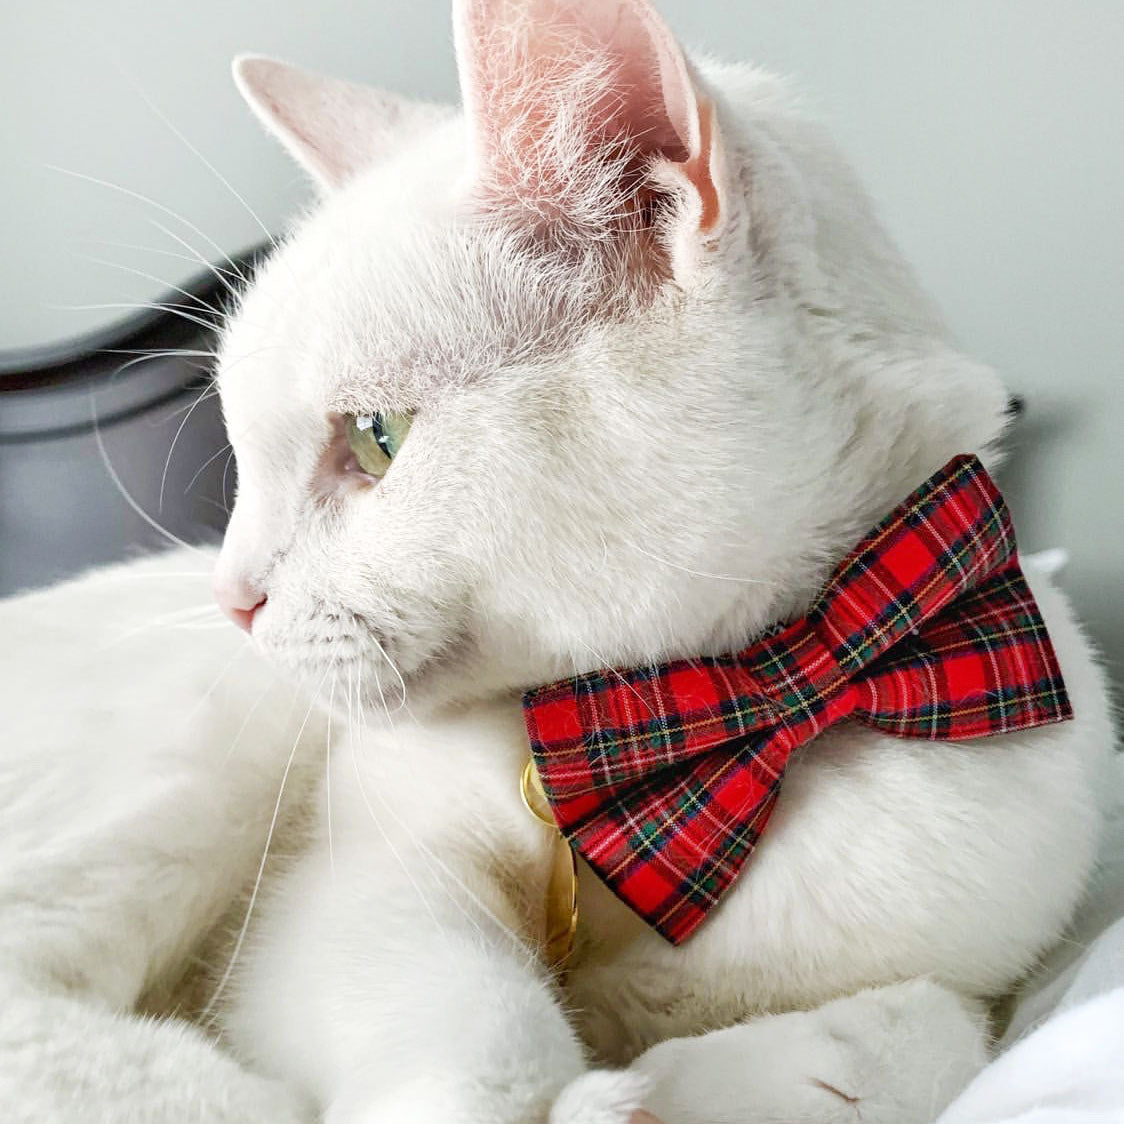 Winter Holiday Break-Away Cat Collars (3 NEW styles available)